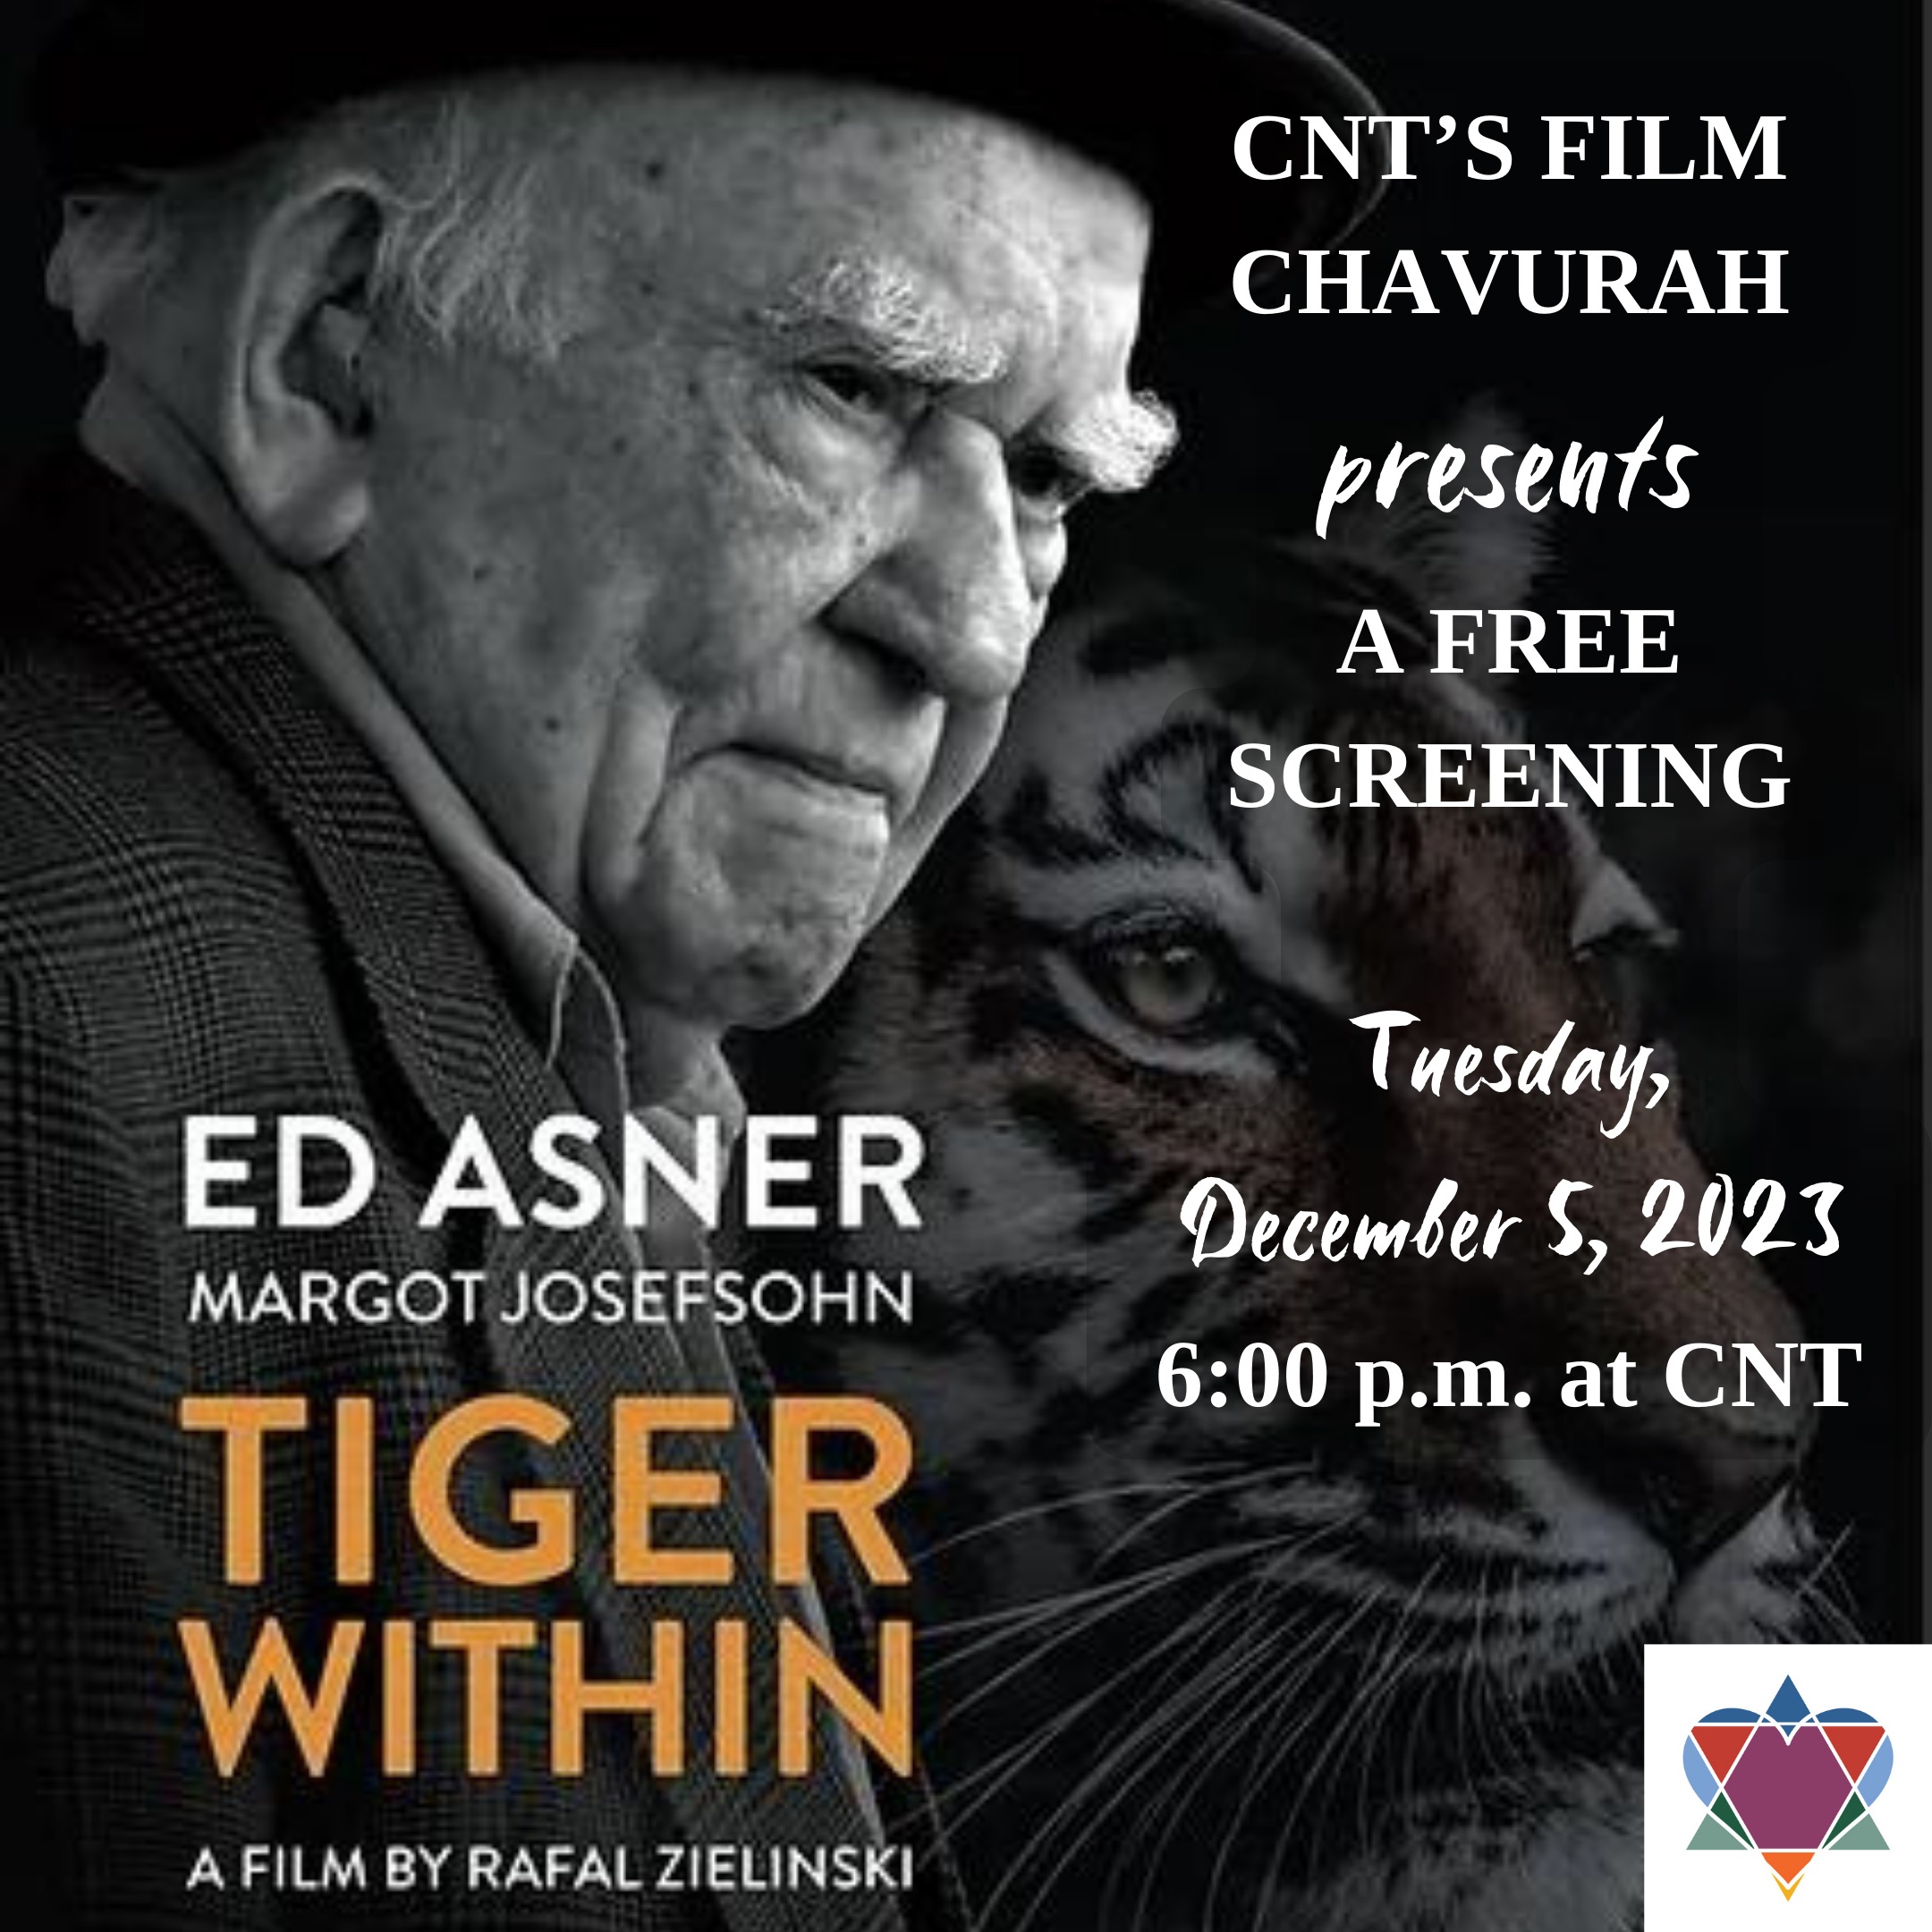 CNT'S FILM CHAVURAH PRESENTS 'TIGER WITHIN'